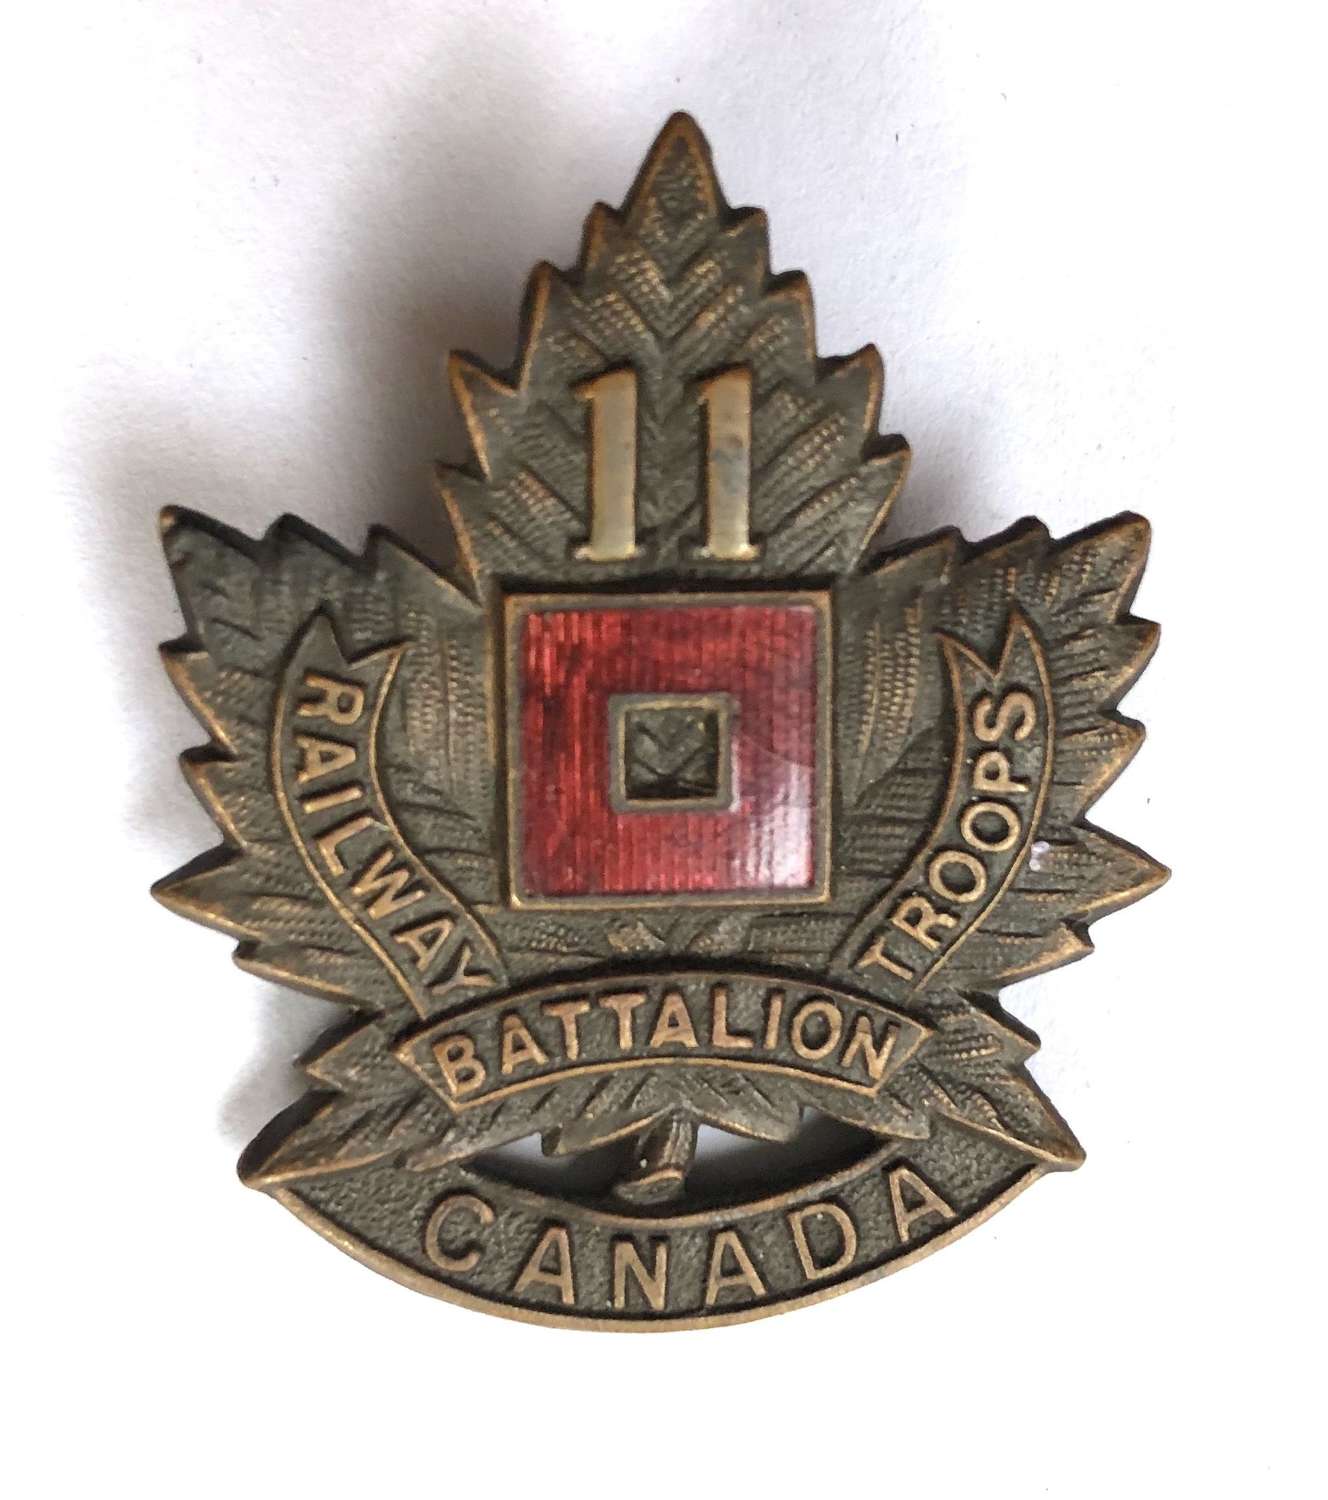 11th Canadian Railway Troops WW1 cap badge by Hicks, London